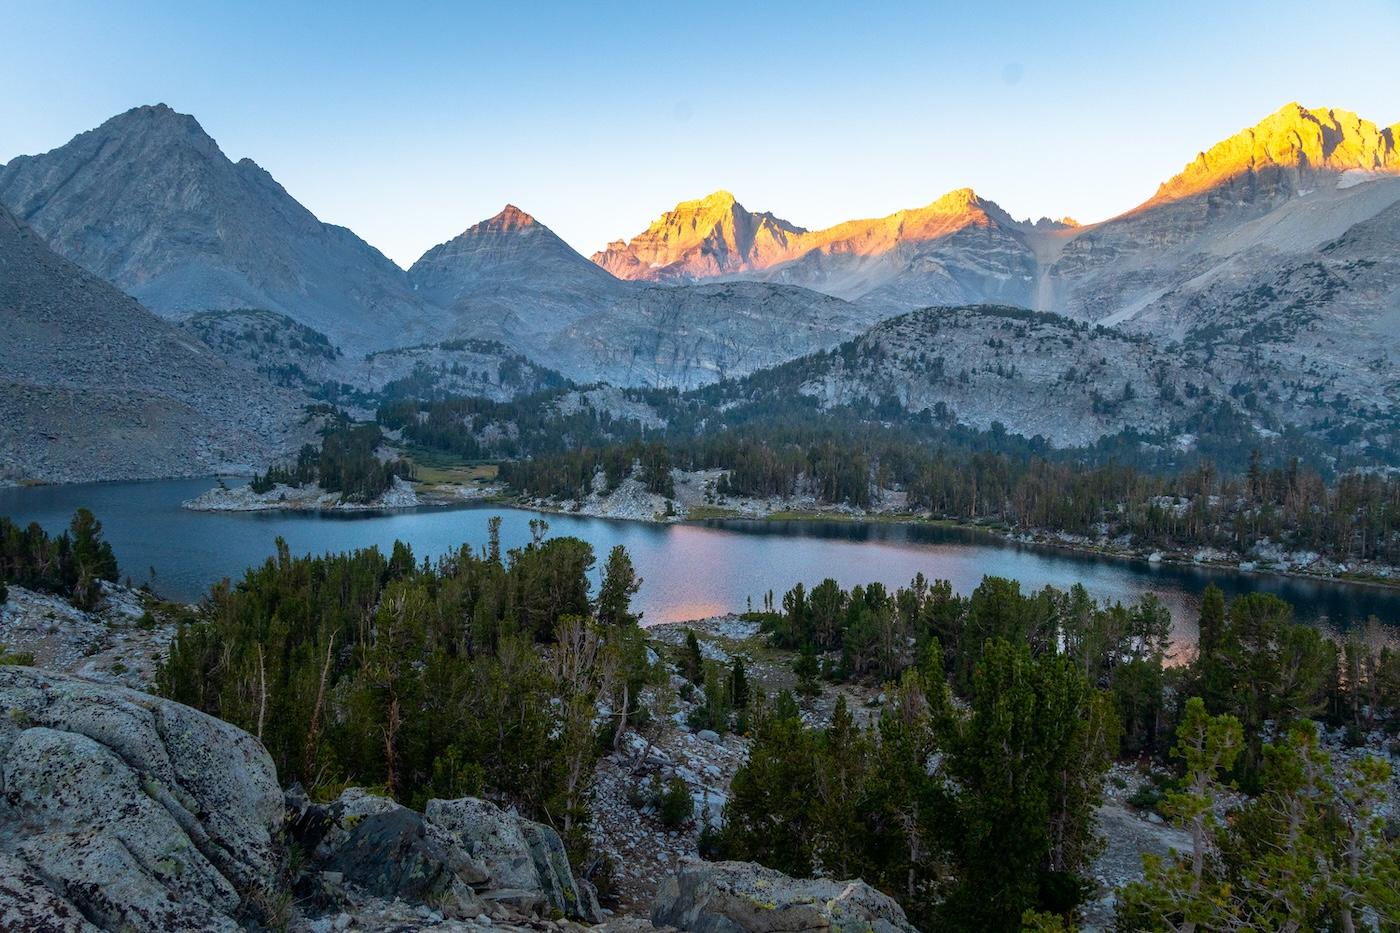 Sunrise at Chickenfoot Lake in The Little Lakes Valley of the Sierras